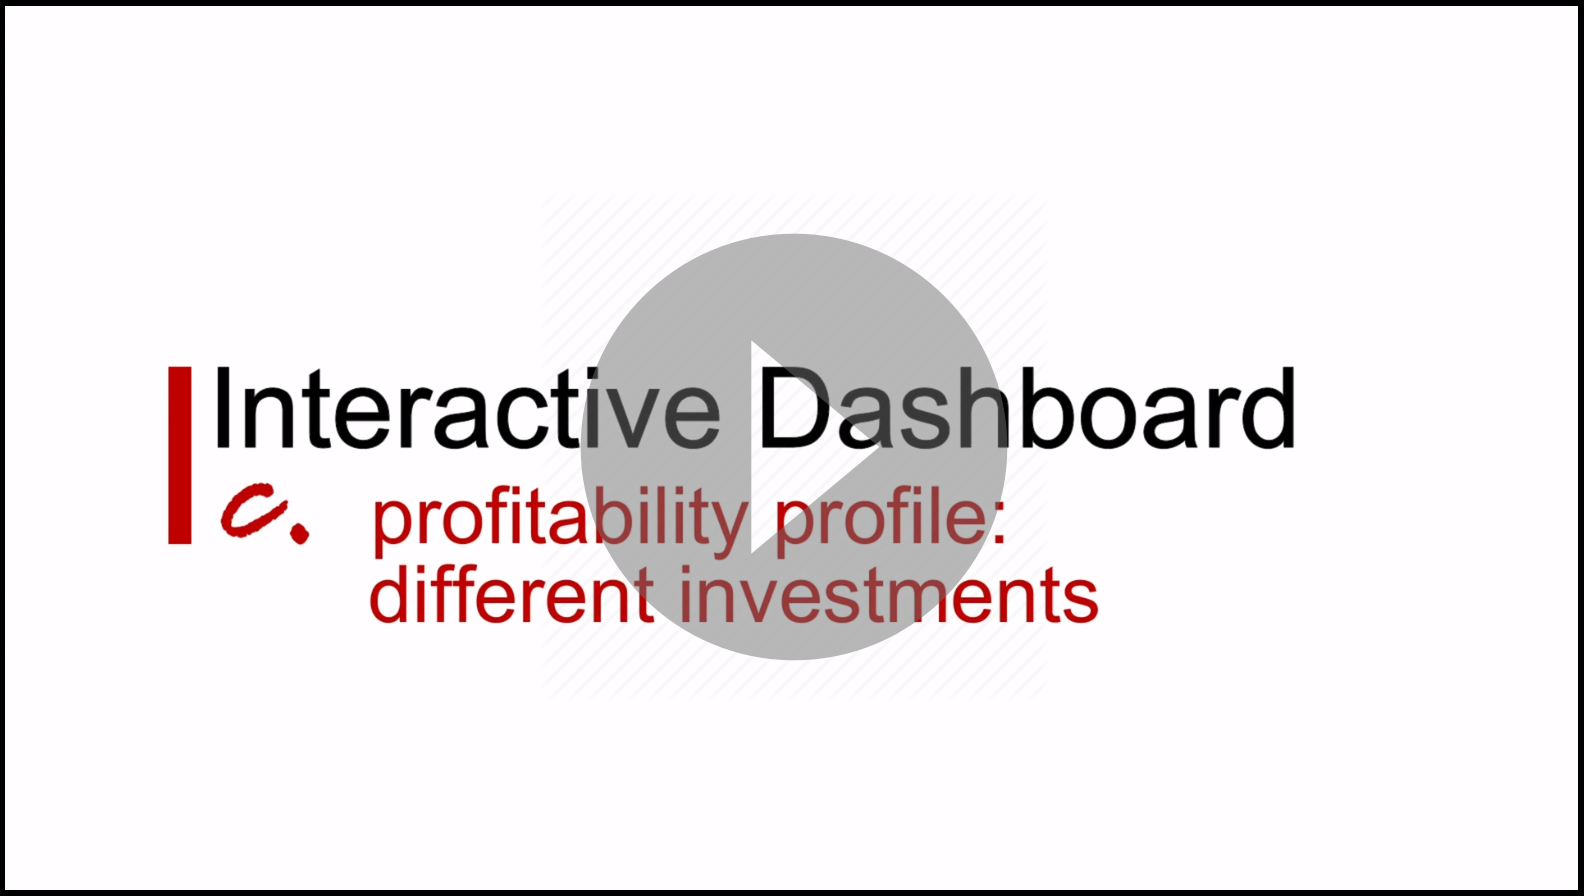 Interactive Dashboard - c. profitability profile: different investments